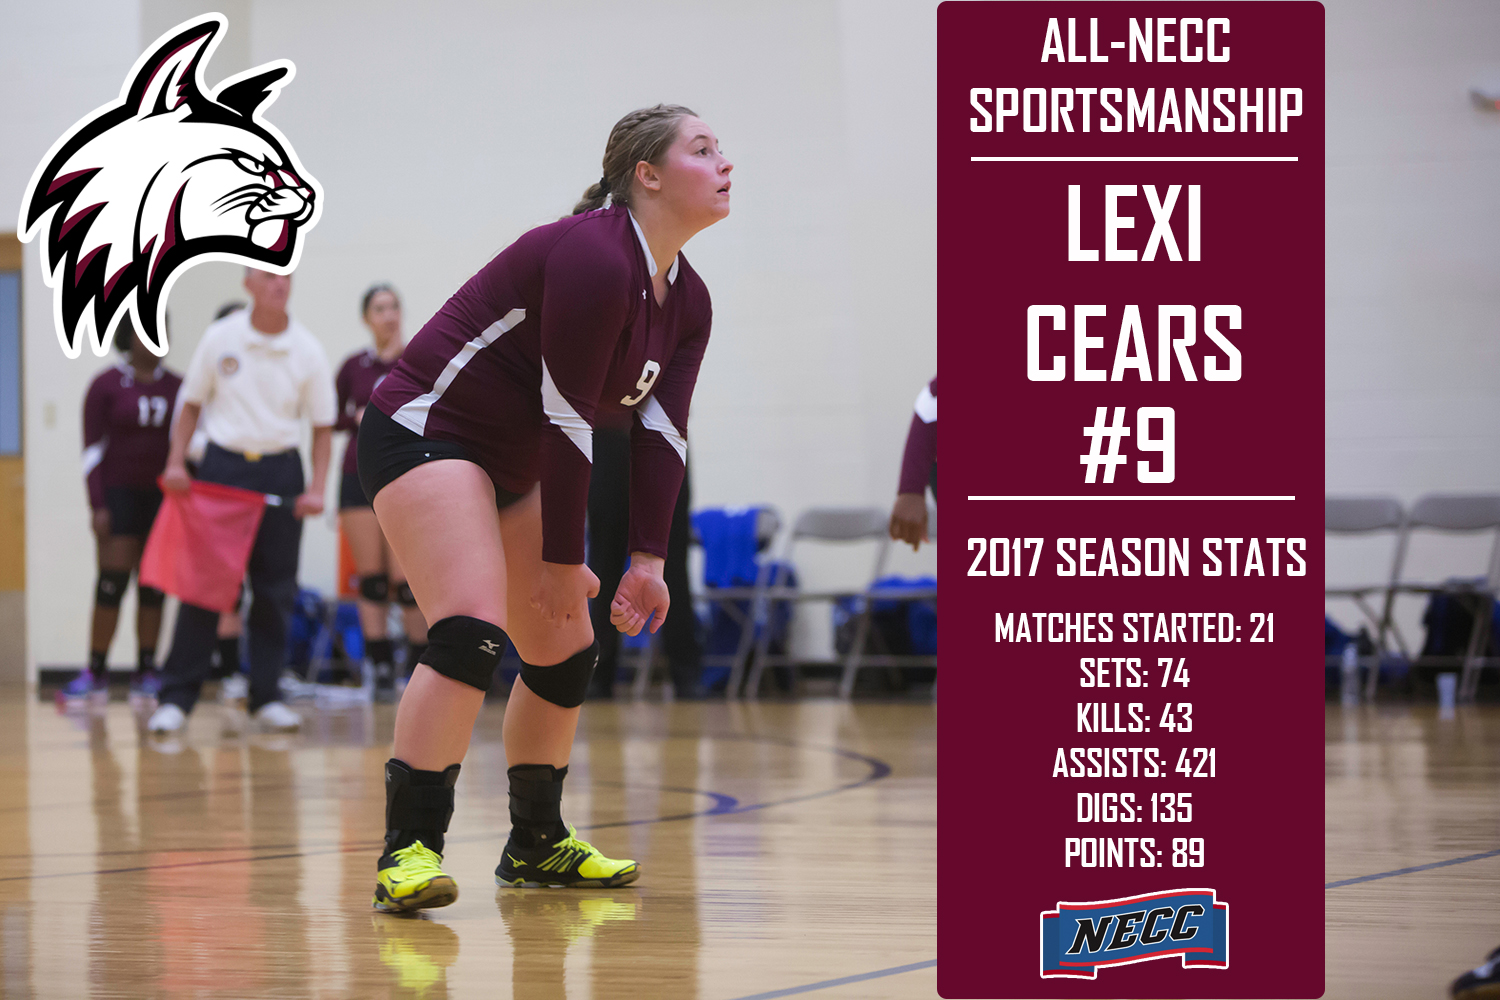 Cears selected to All-NECC Sportsmanship Team